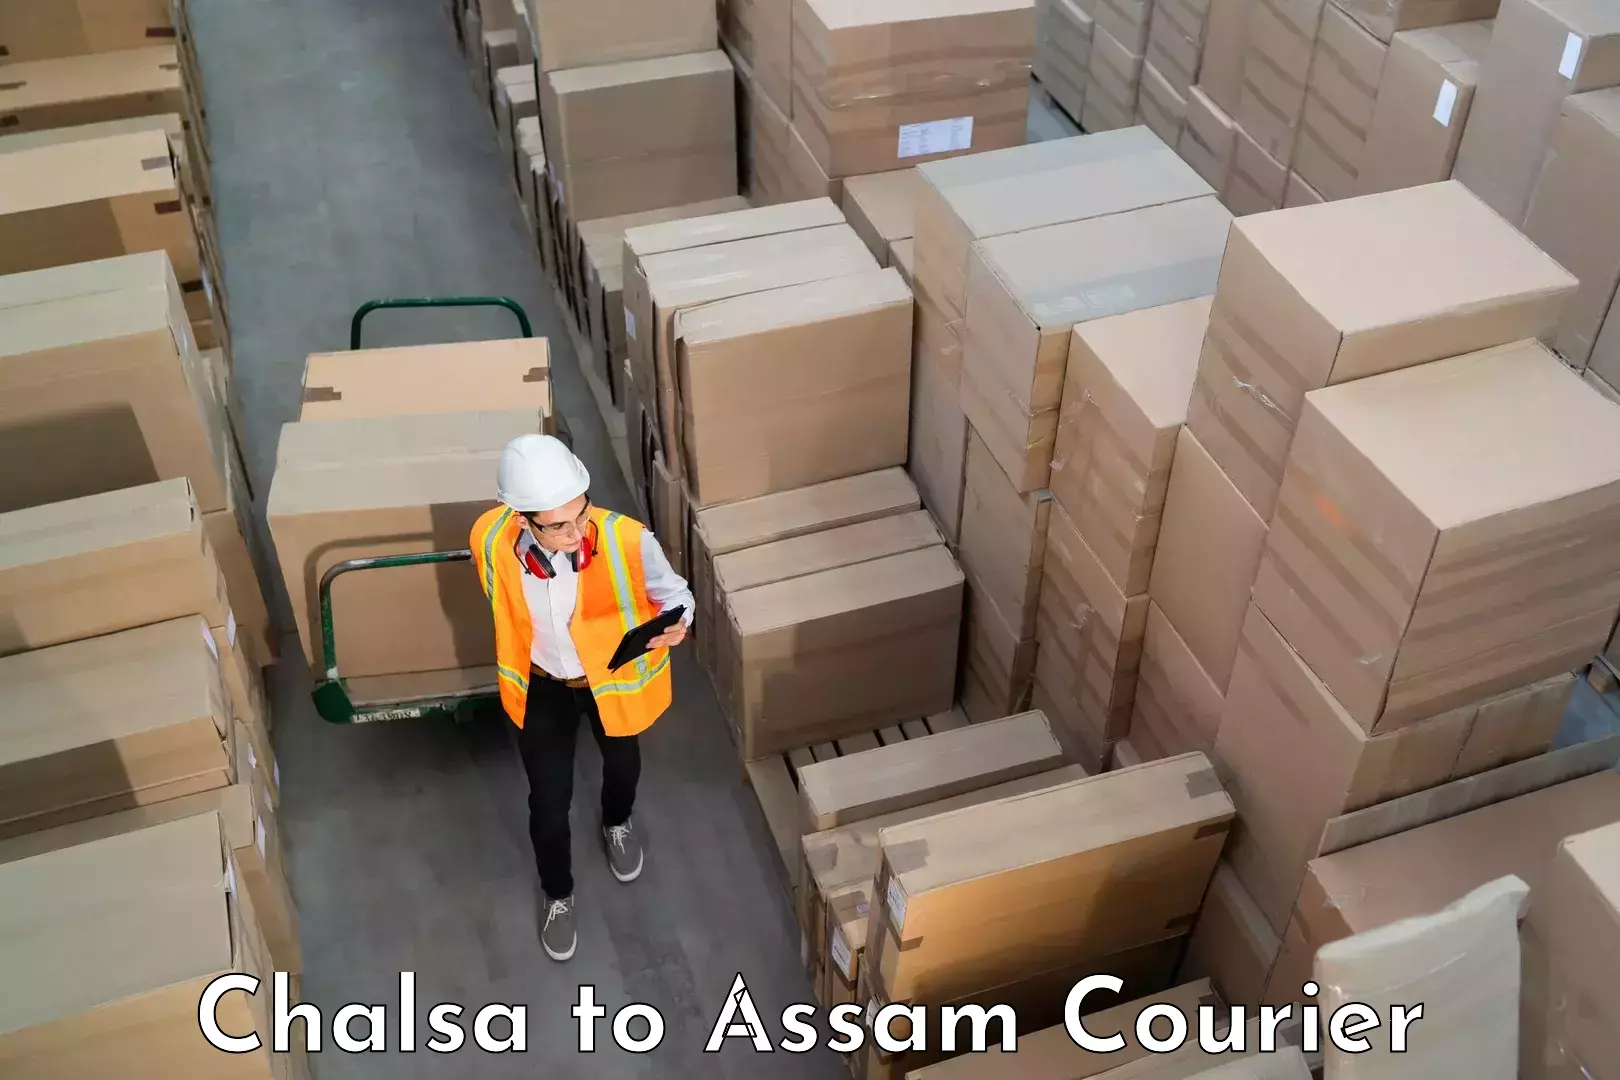 Doorstep luggage collection Chalsa to Assam